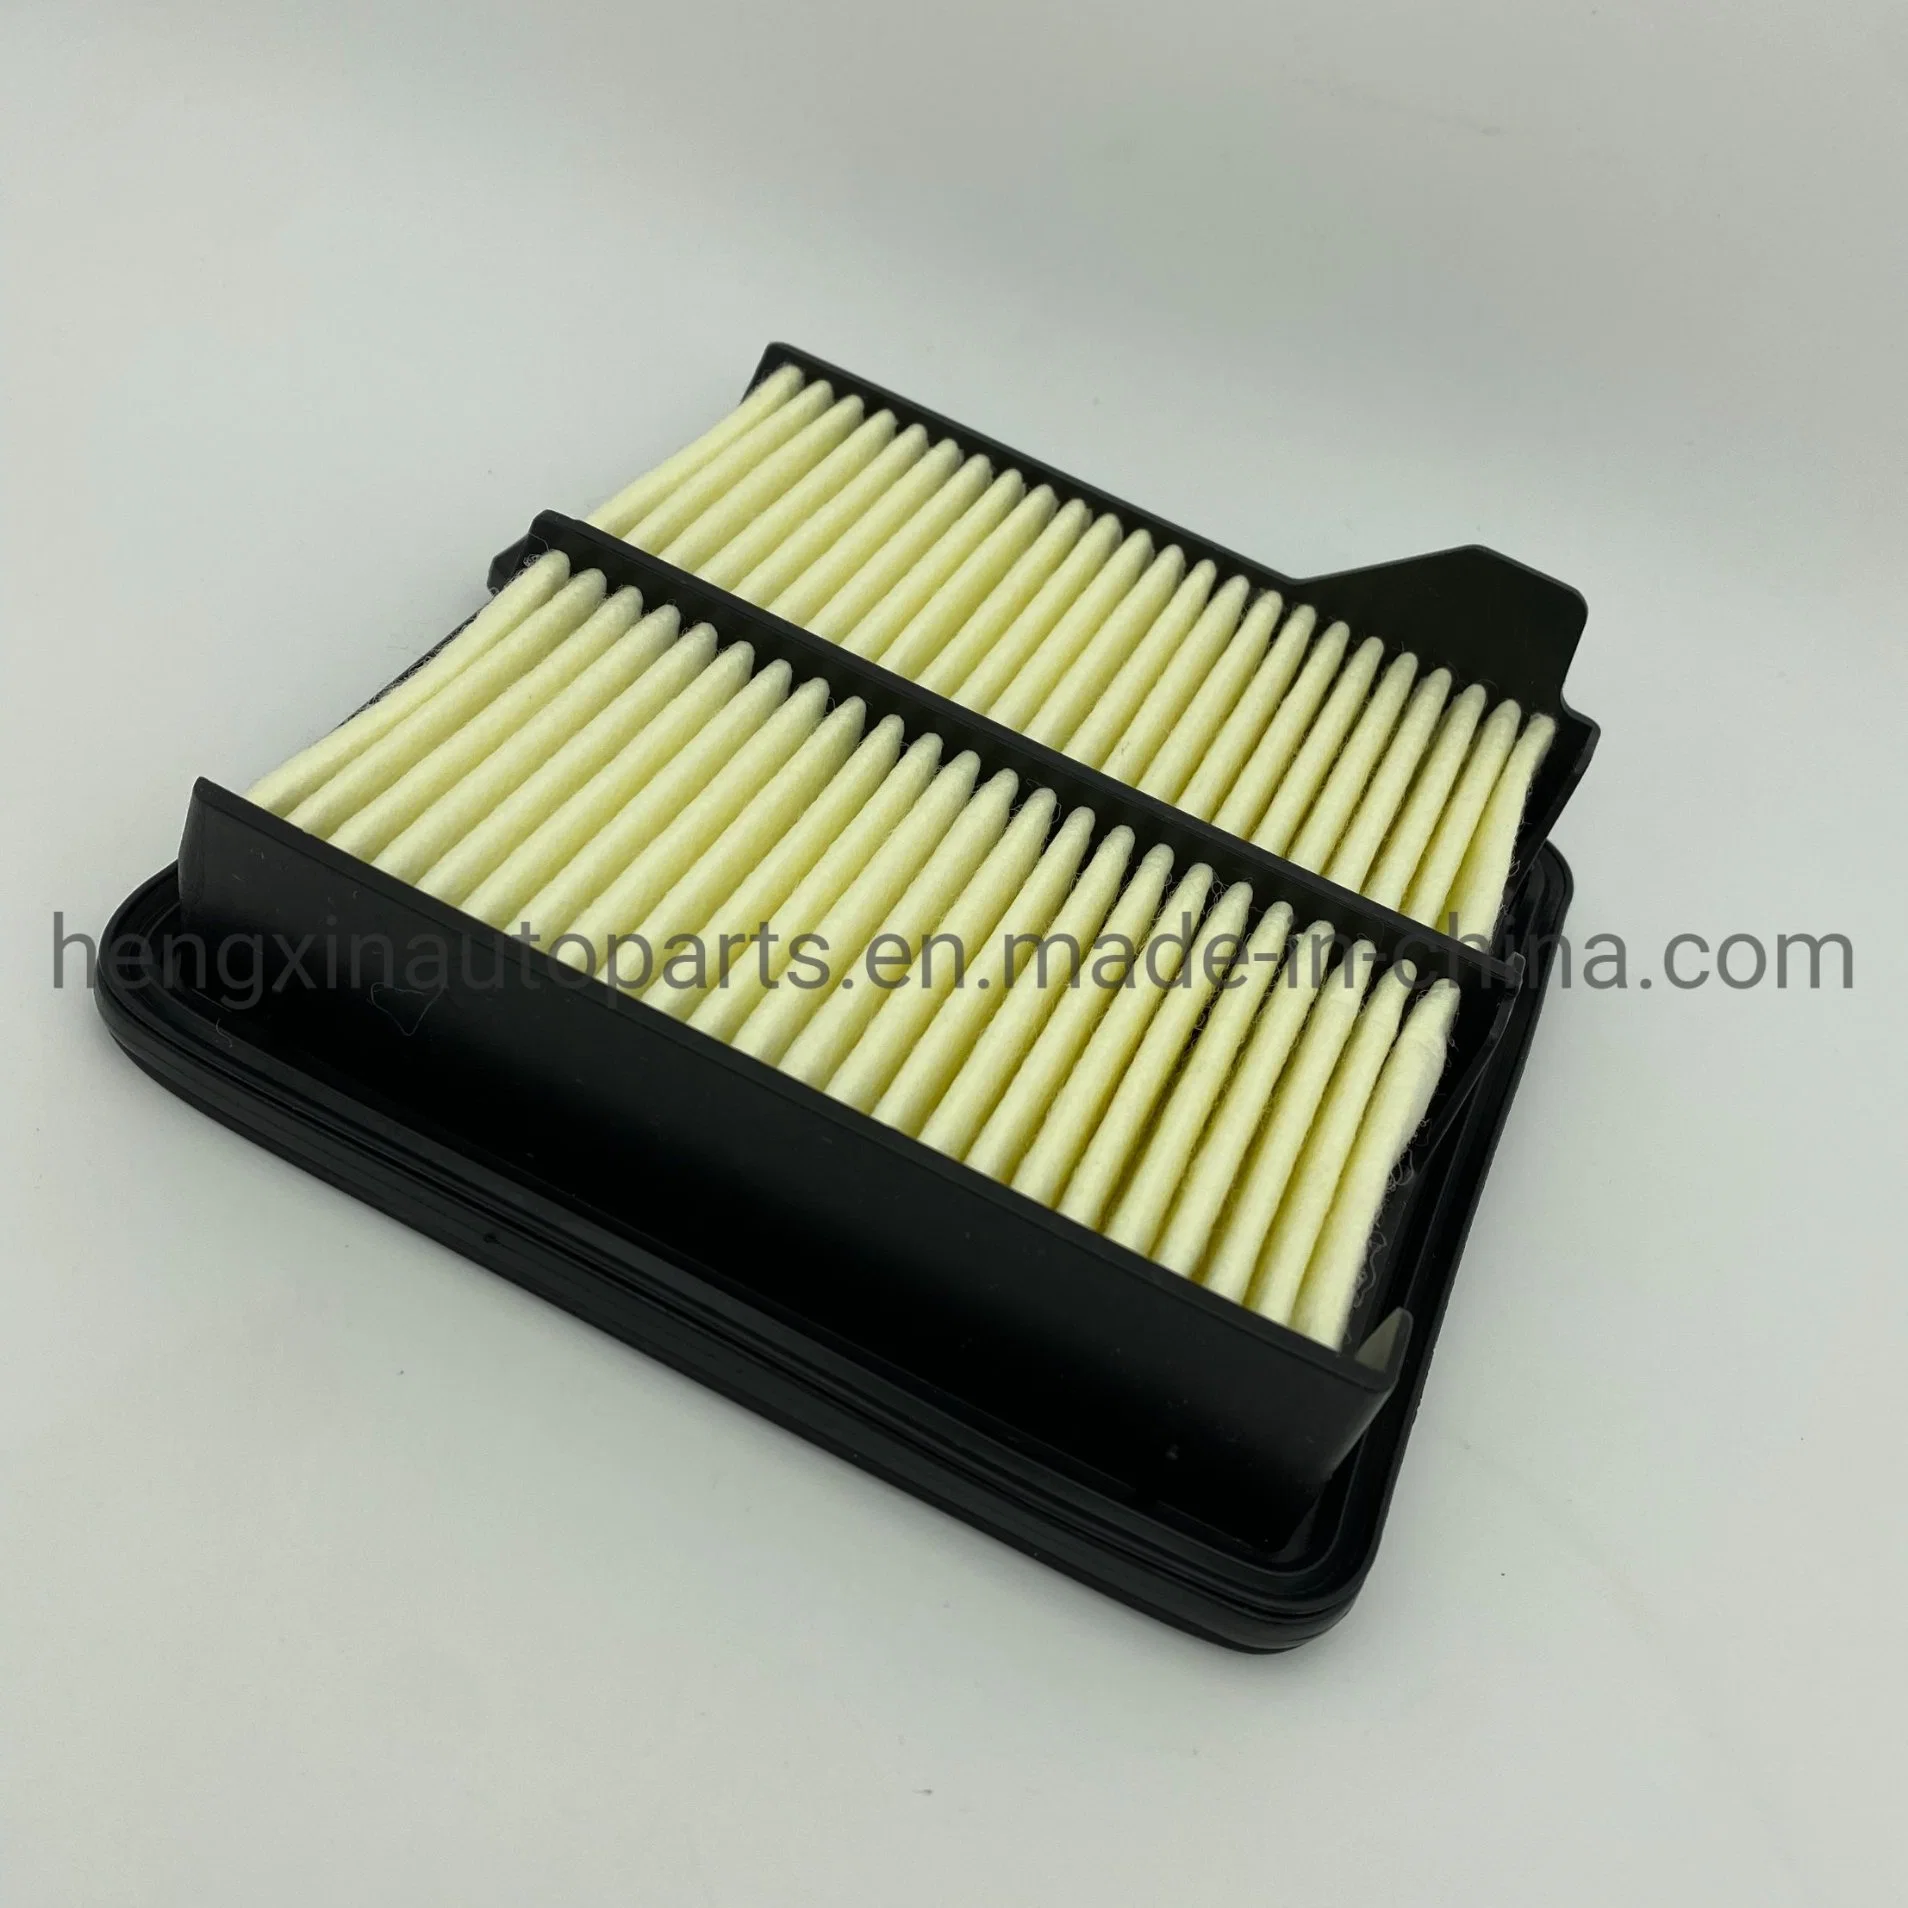 17220-Rb6-Z00 Car Auto Parts High quality/High cost performance  Air Filter